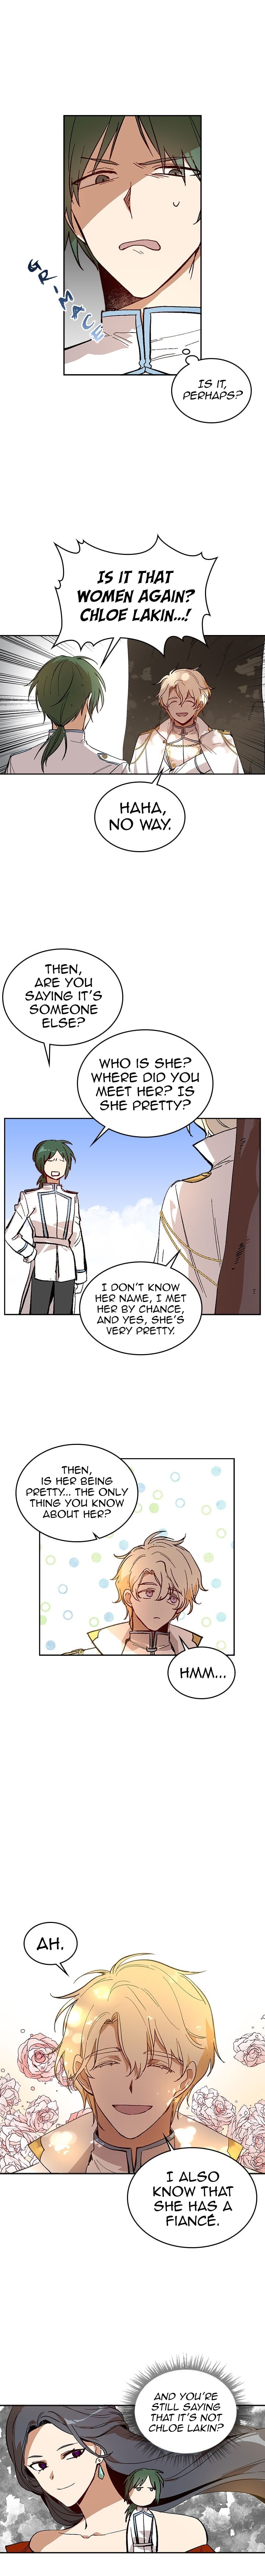 The Reason Why Raeliana Ended up at the Duke's Mansion Ch. 74